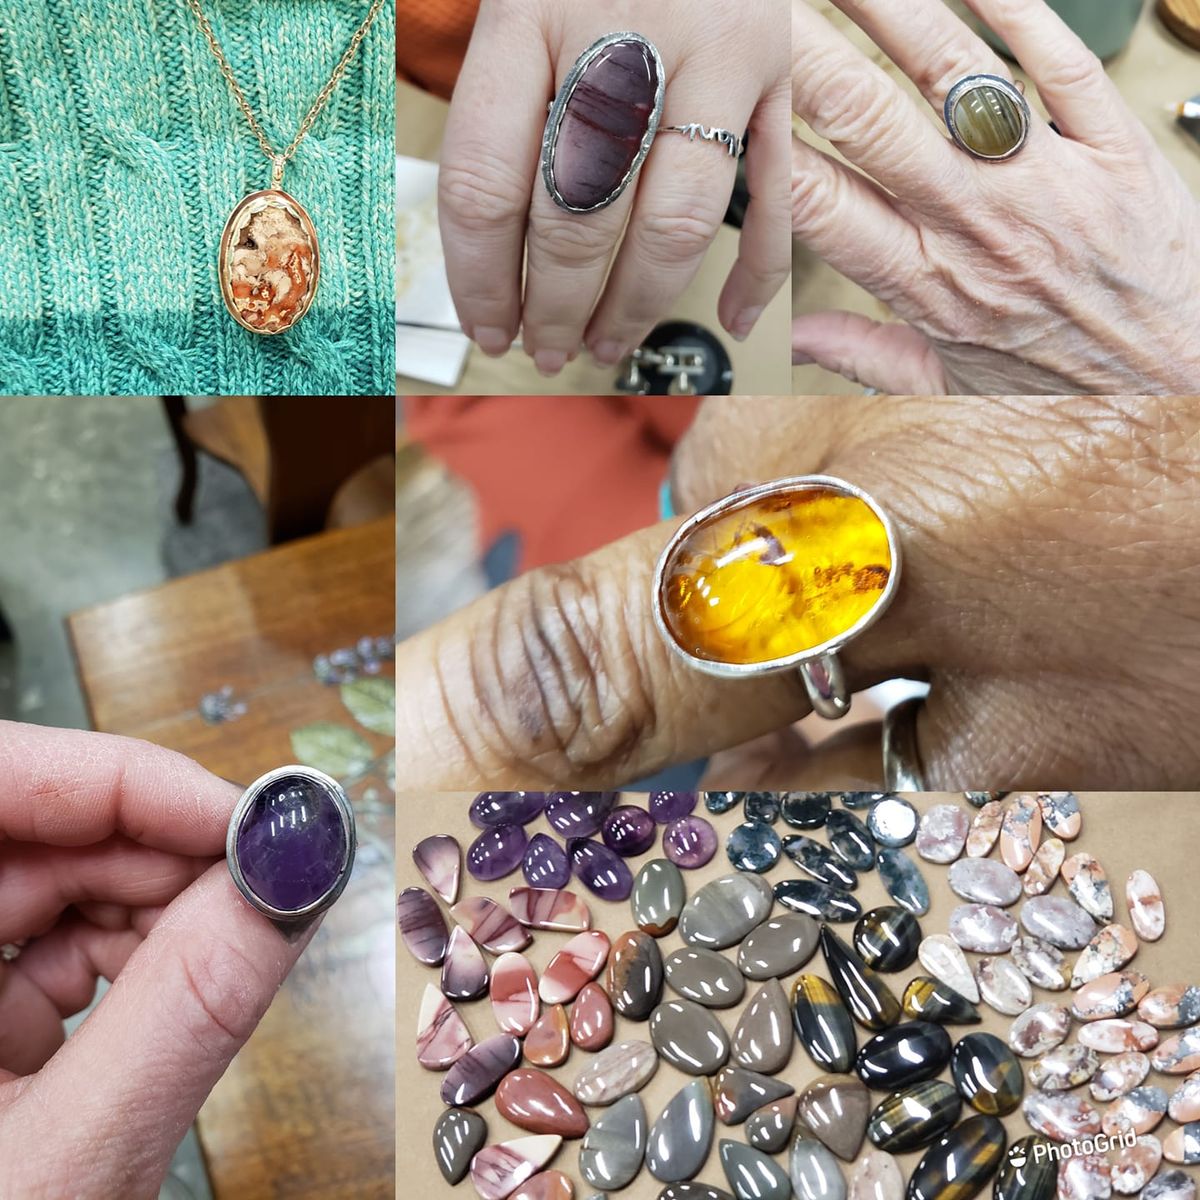 Thursday, May 9th Create a STERLING SILVER GEMSTONE RING or PENDANT